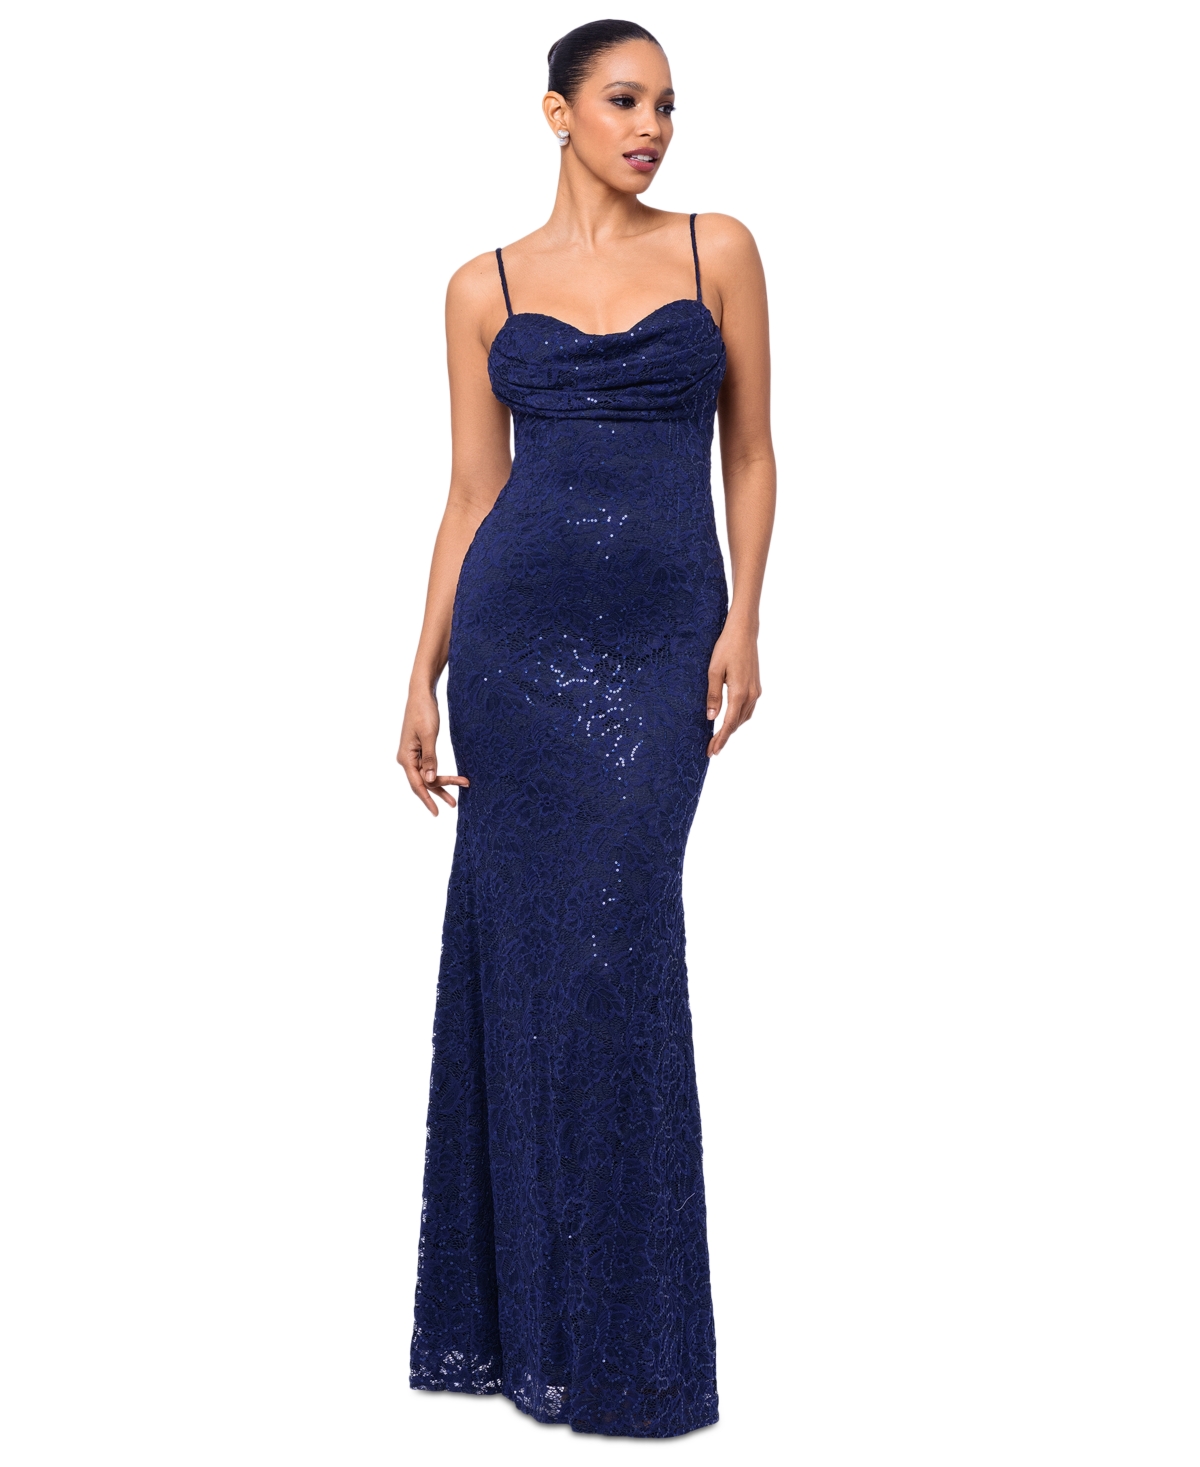 Women's Sequin Lace Draped Sleeveless Gown - Navy